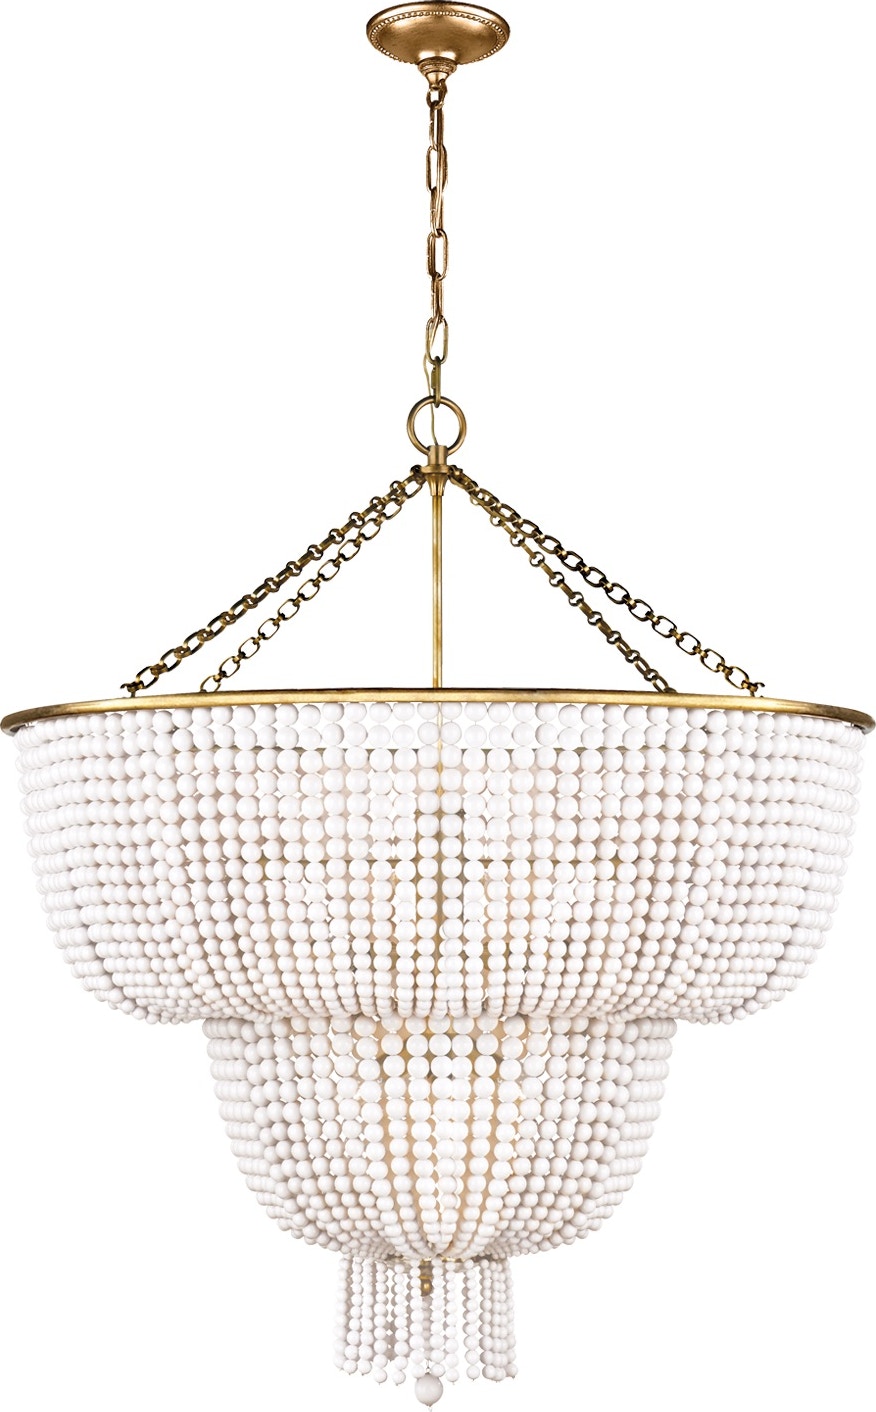 Jacqueline Two-tier Chandelier In Brass With Hand-rubbed Acrylic White Antique